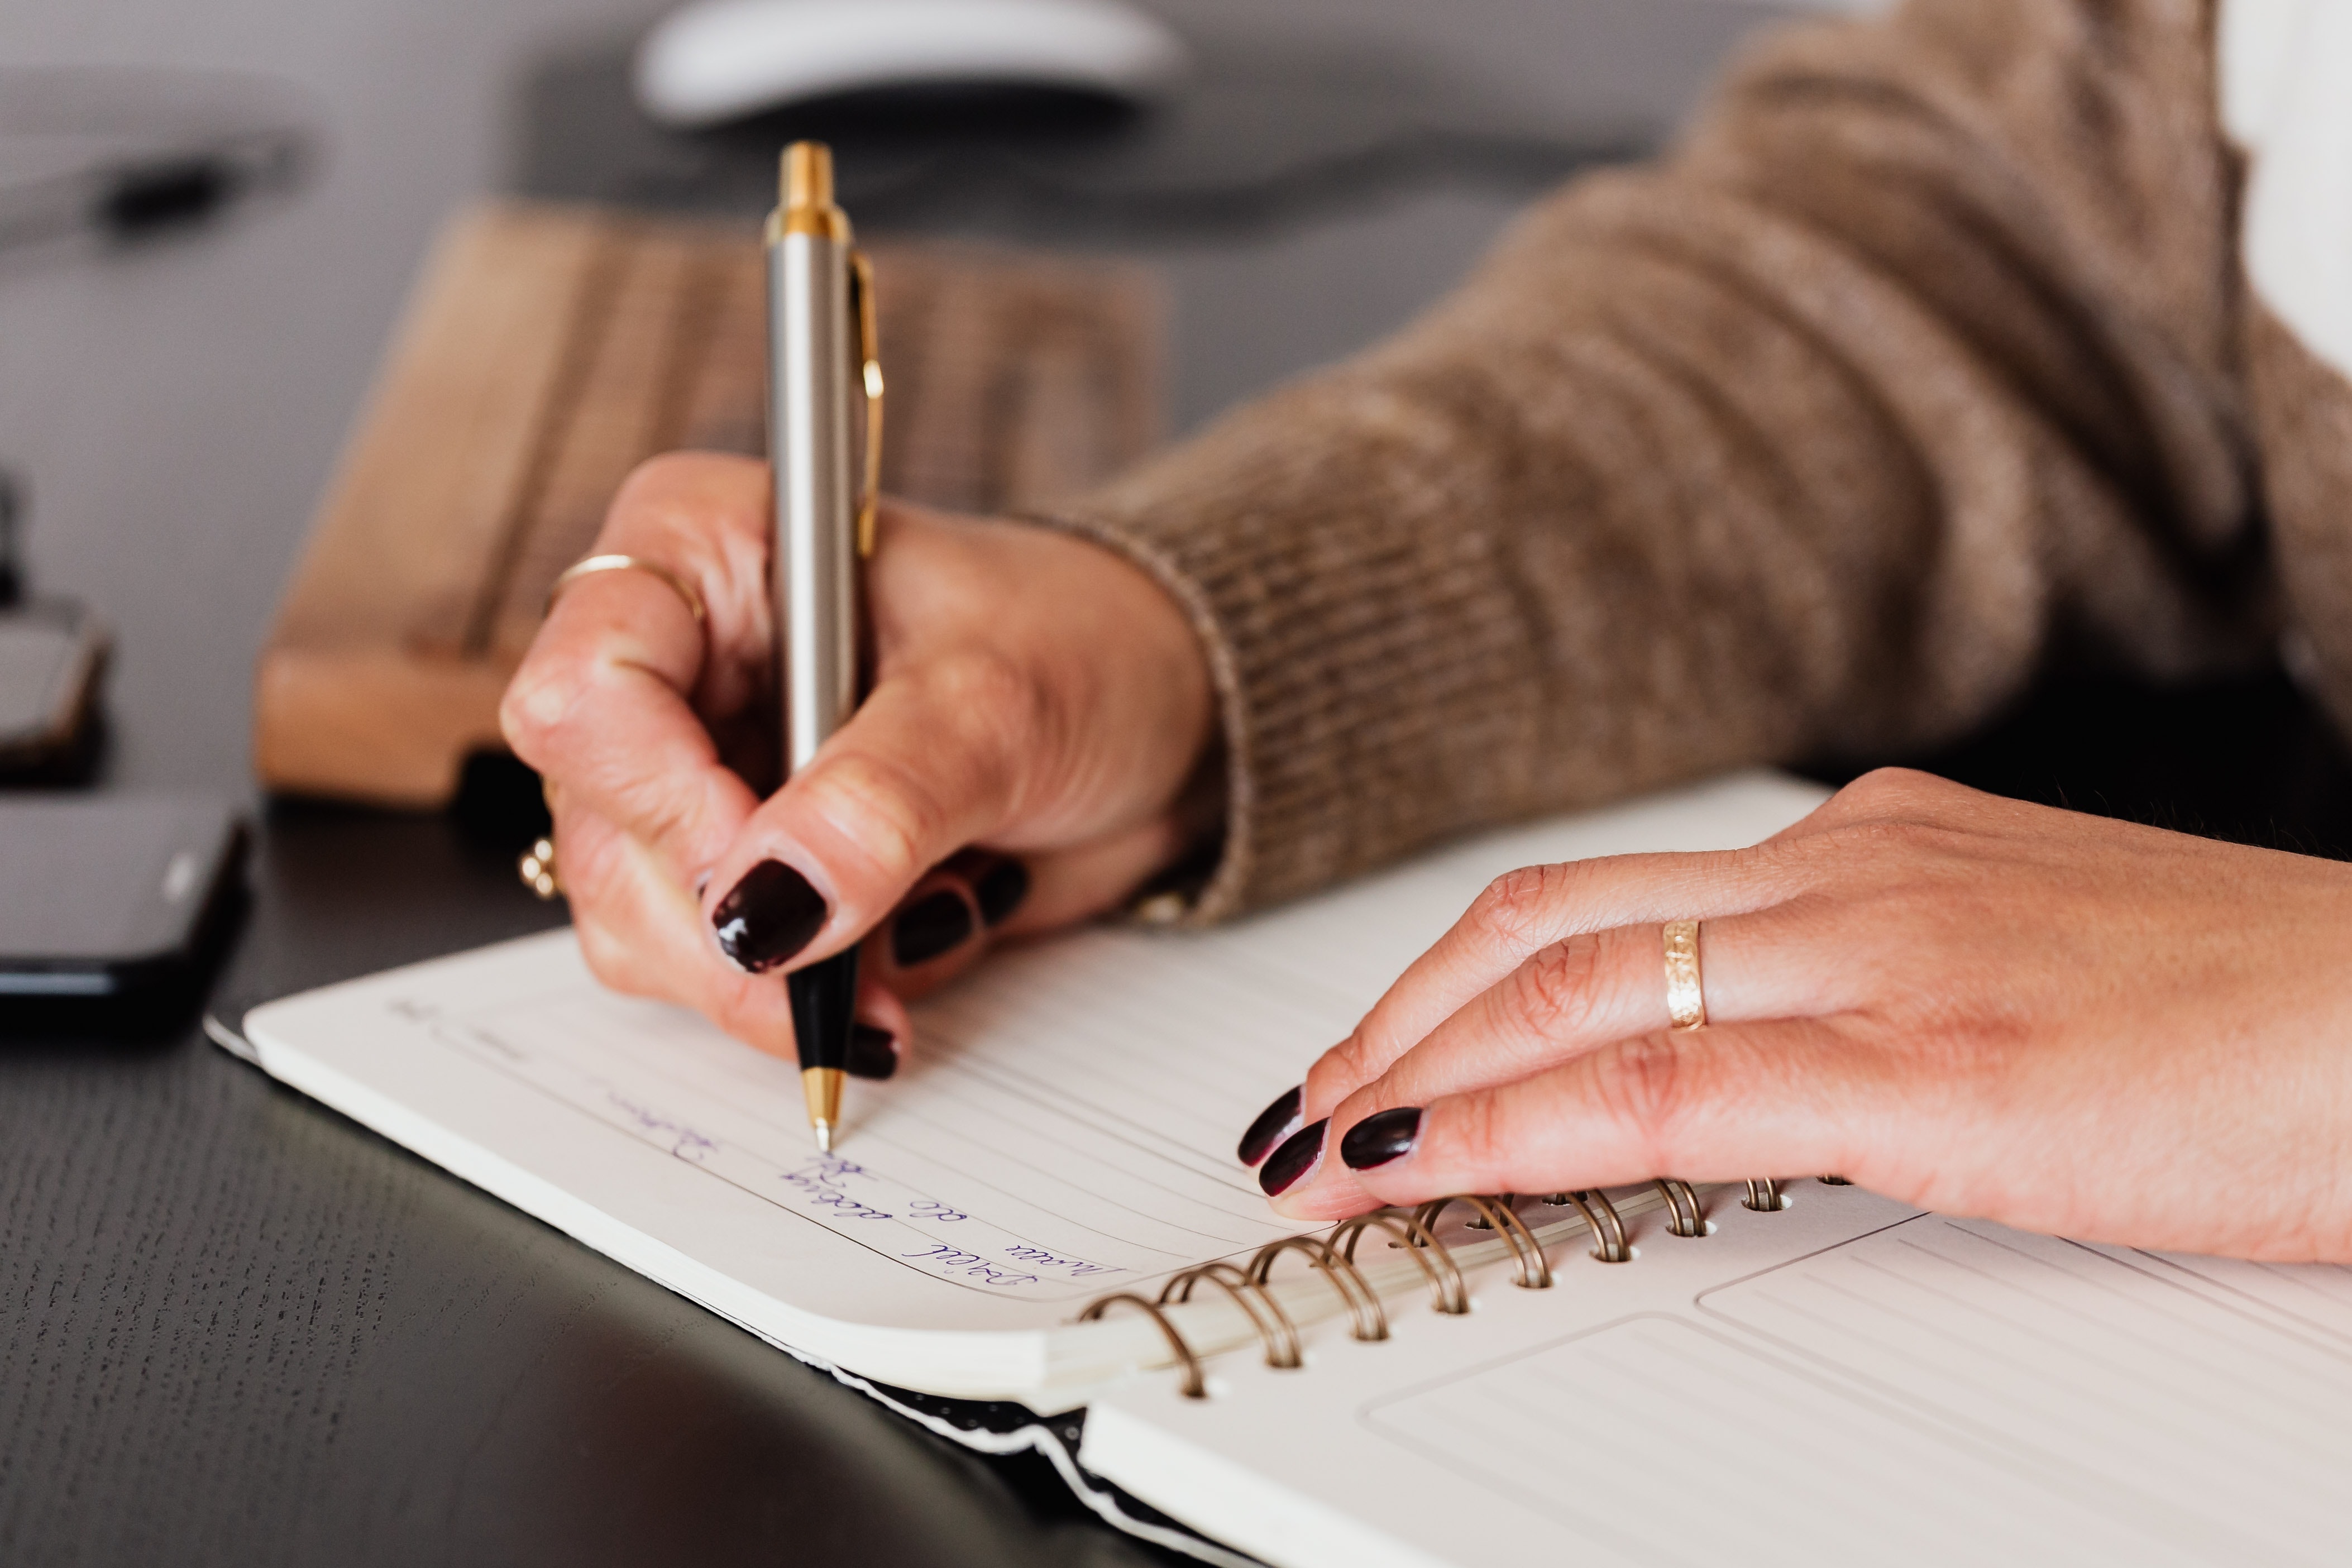 Image of woman with black painted fingernails taking notes in notebook using silver and gold pen.